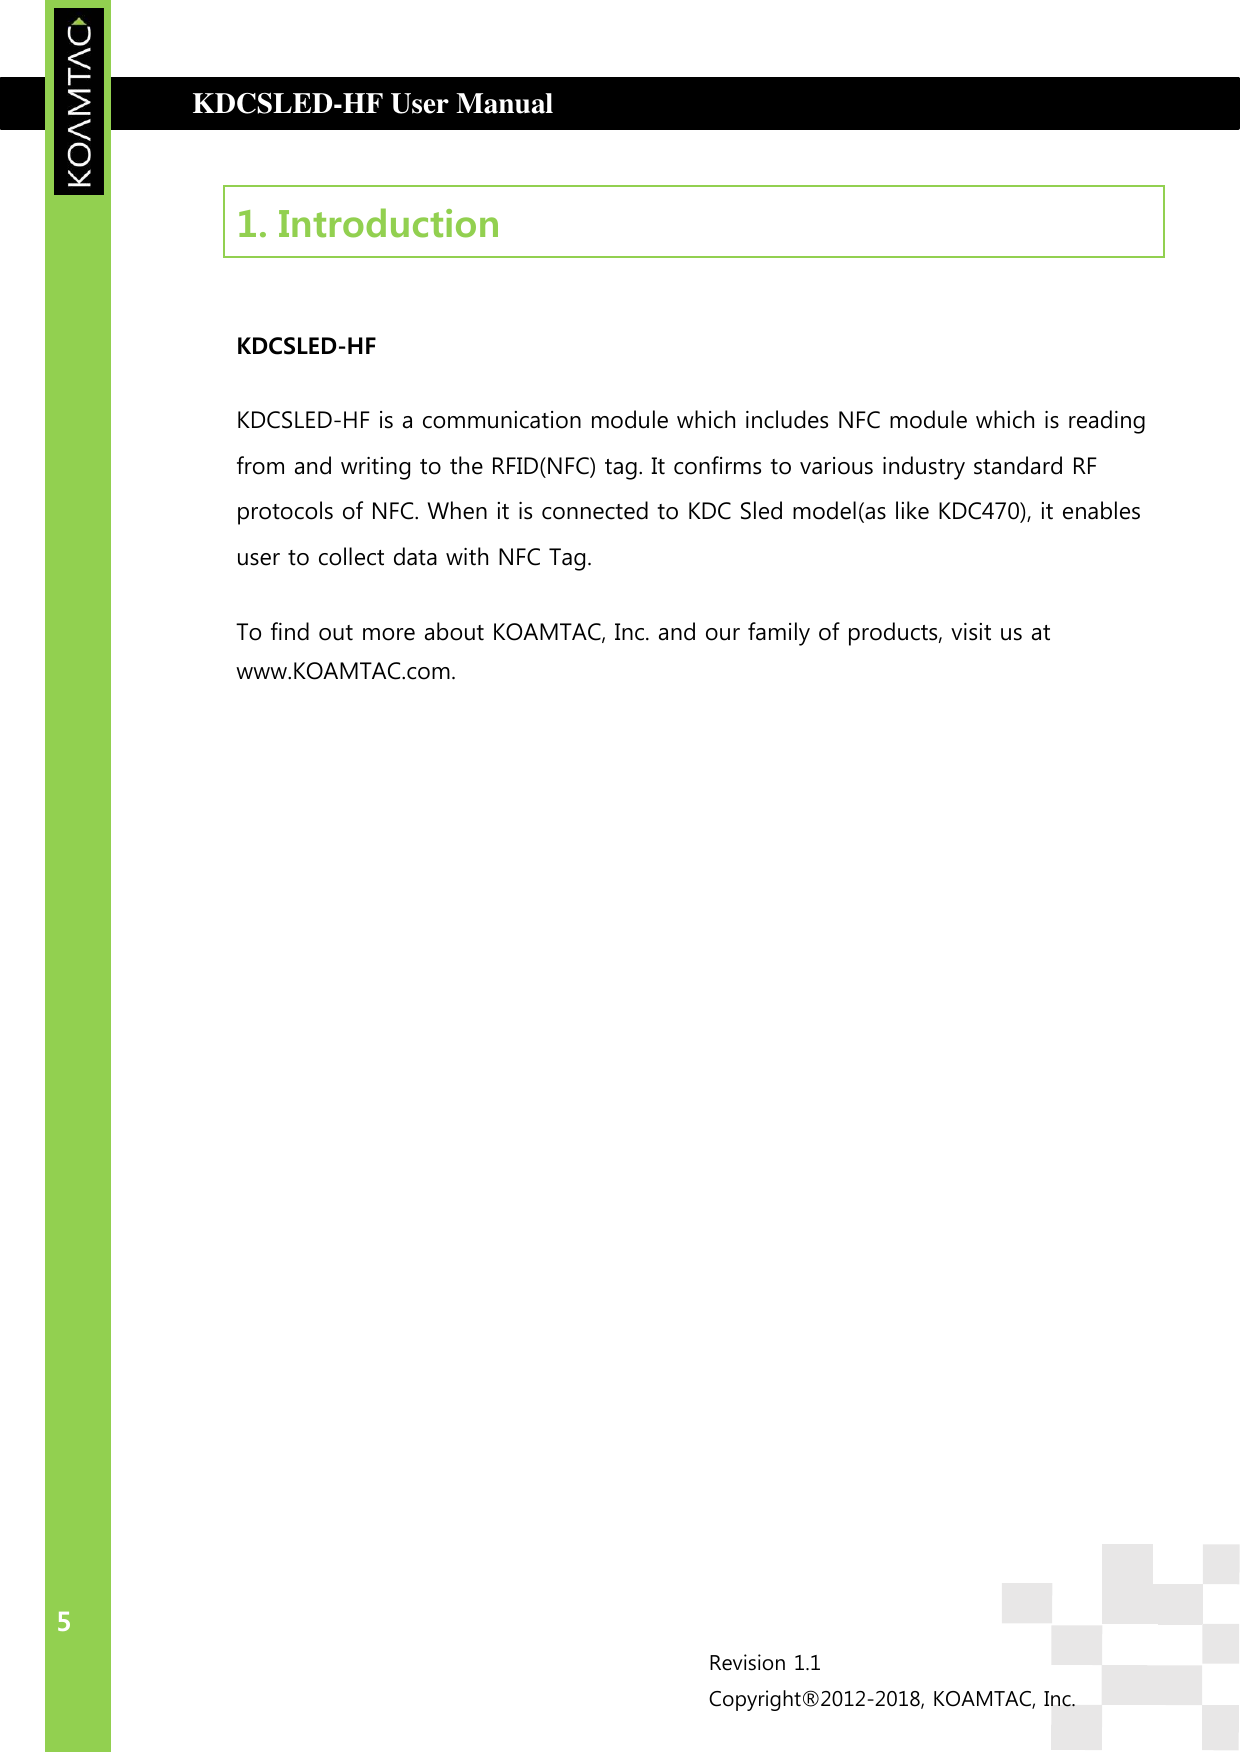  KDCSLED-HF User Manual                                      INTRODUCTION 5 Revision 1.1 Copyright®2012-2018, KOAMTAC, Inc.  1. Introduction    KDCSLED-HF  KDCSLED-HF is a communication module which includes NFC module which is reading from and writing to the RFID(NFC) tag. It confirms to various industry standard RF protocols of NFC. When it is connected to KDC Sled model(as like KDC470), it enables user to collect data with NFC Tag. To find out more about KOAMTAC, Inc. and our family of products, visit us at www.KOAMTAC.com.  